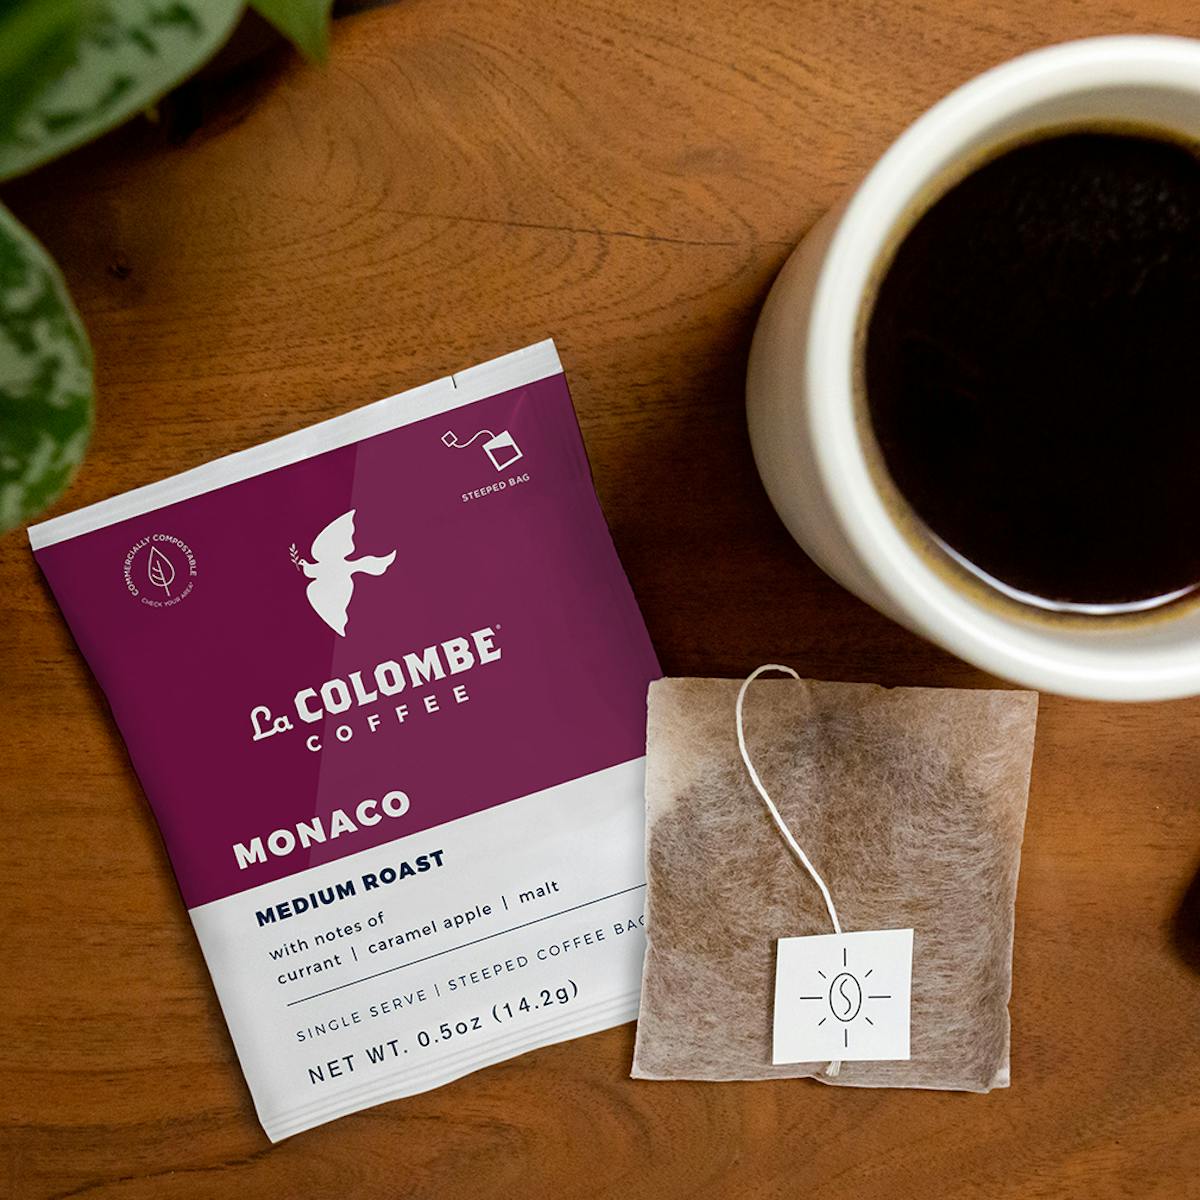 Steeped Coffee adds La Colombe Coffee Roasters to its brand lineup.